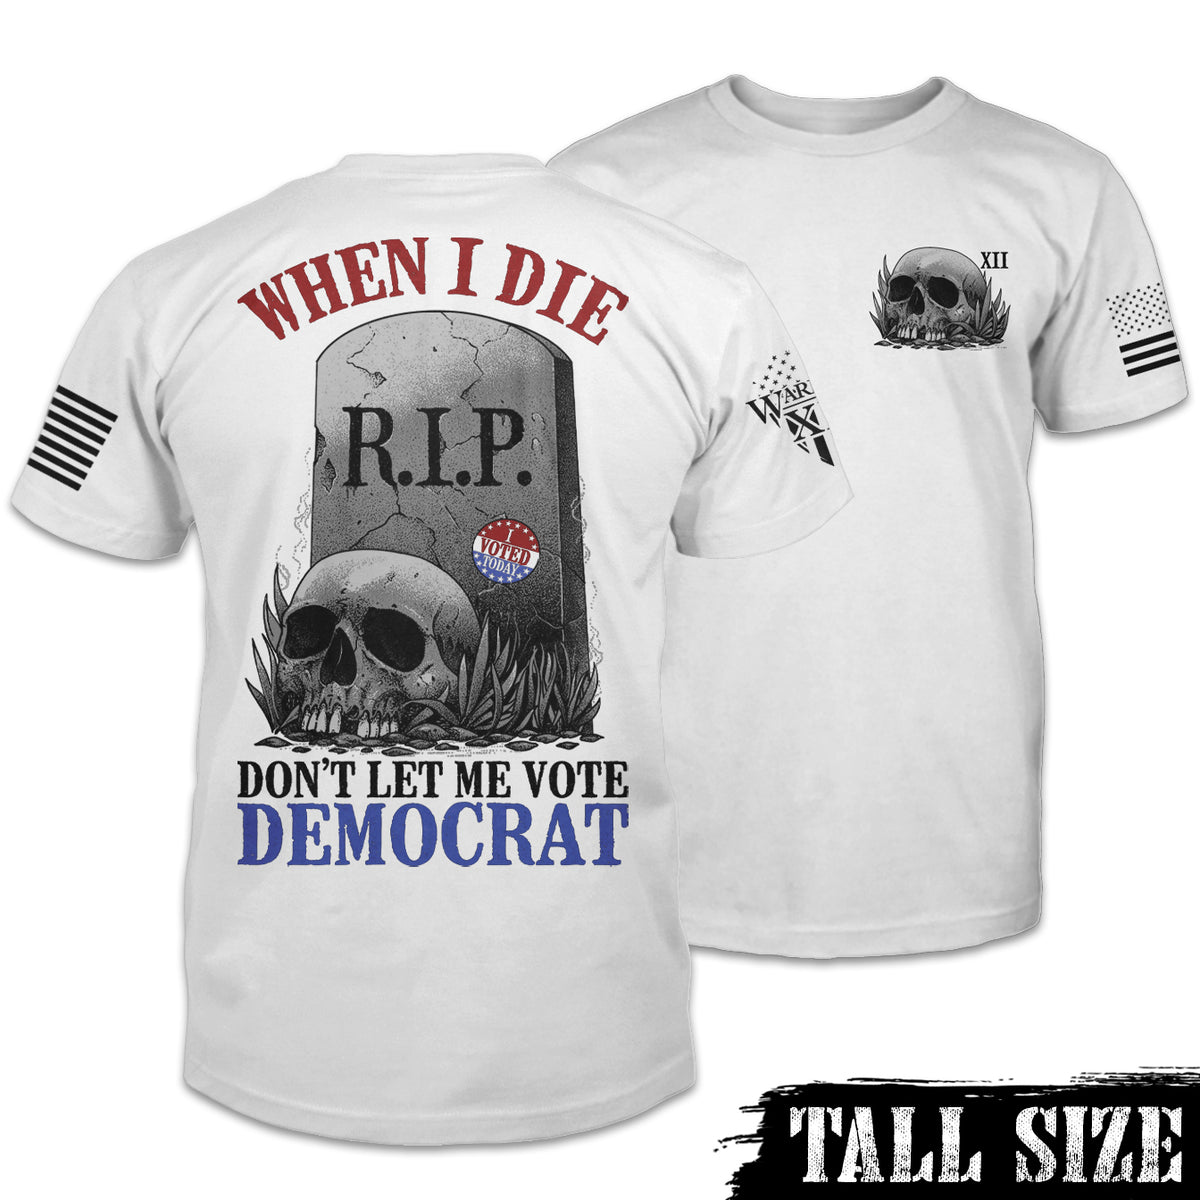 Front and back white tall size shirt with the words "When I die, don't let me vote Democrat" with a gravestone and a skull printed on the shirt.